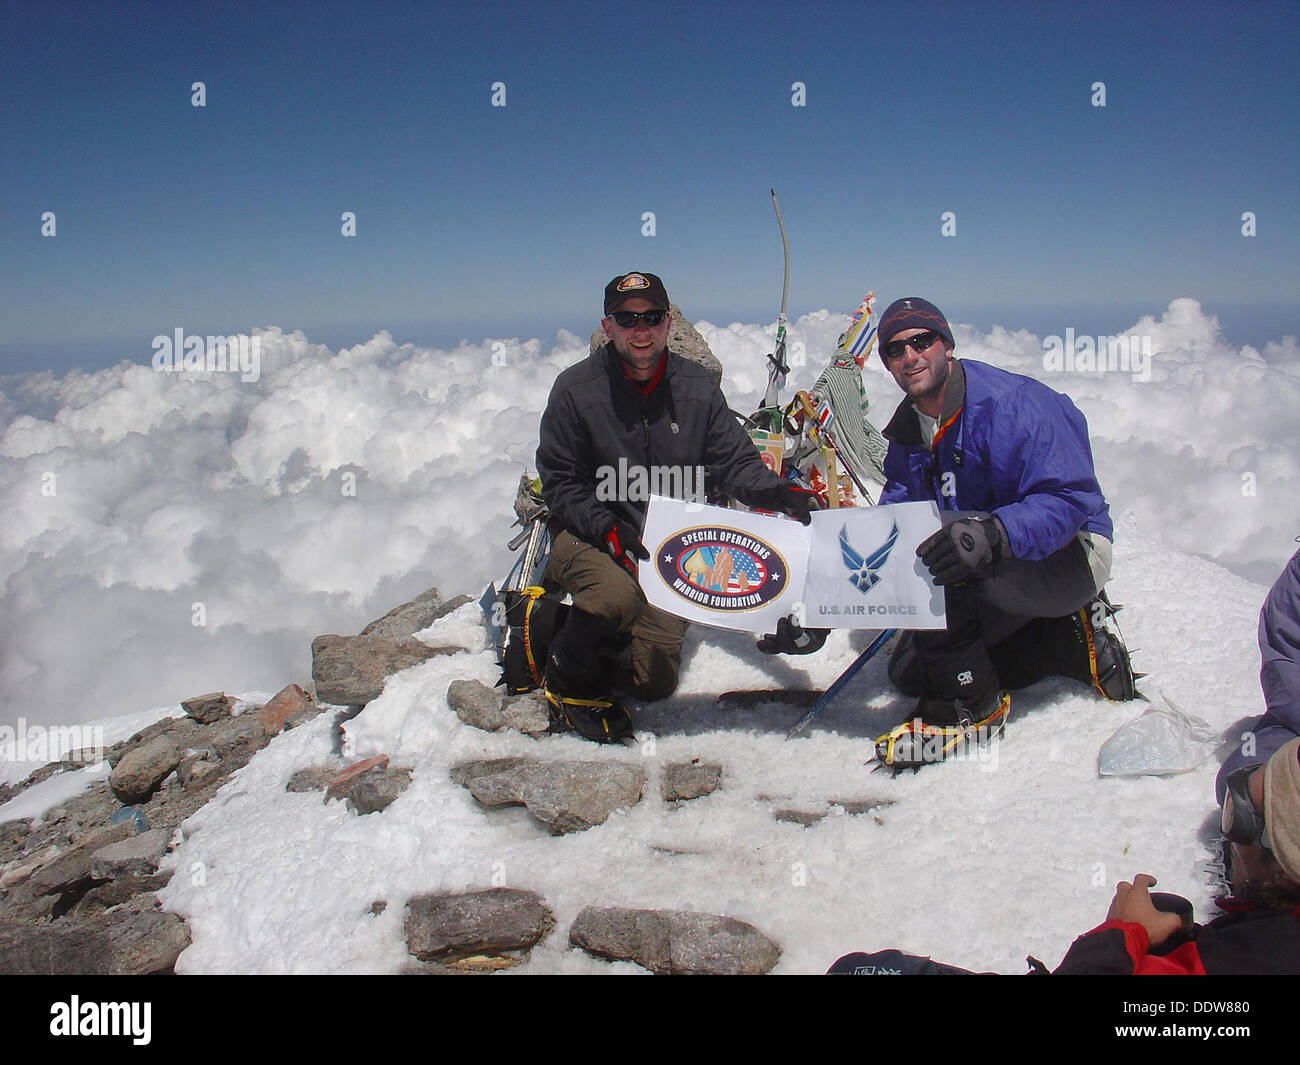 US Air Force Capt. Rob Marshall and 1st Lt. Mark Uberuaga pose on the summit of Mount Elbrus July 31, 2005 in Russia. Stock Photo